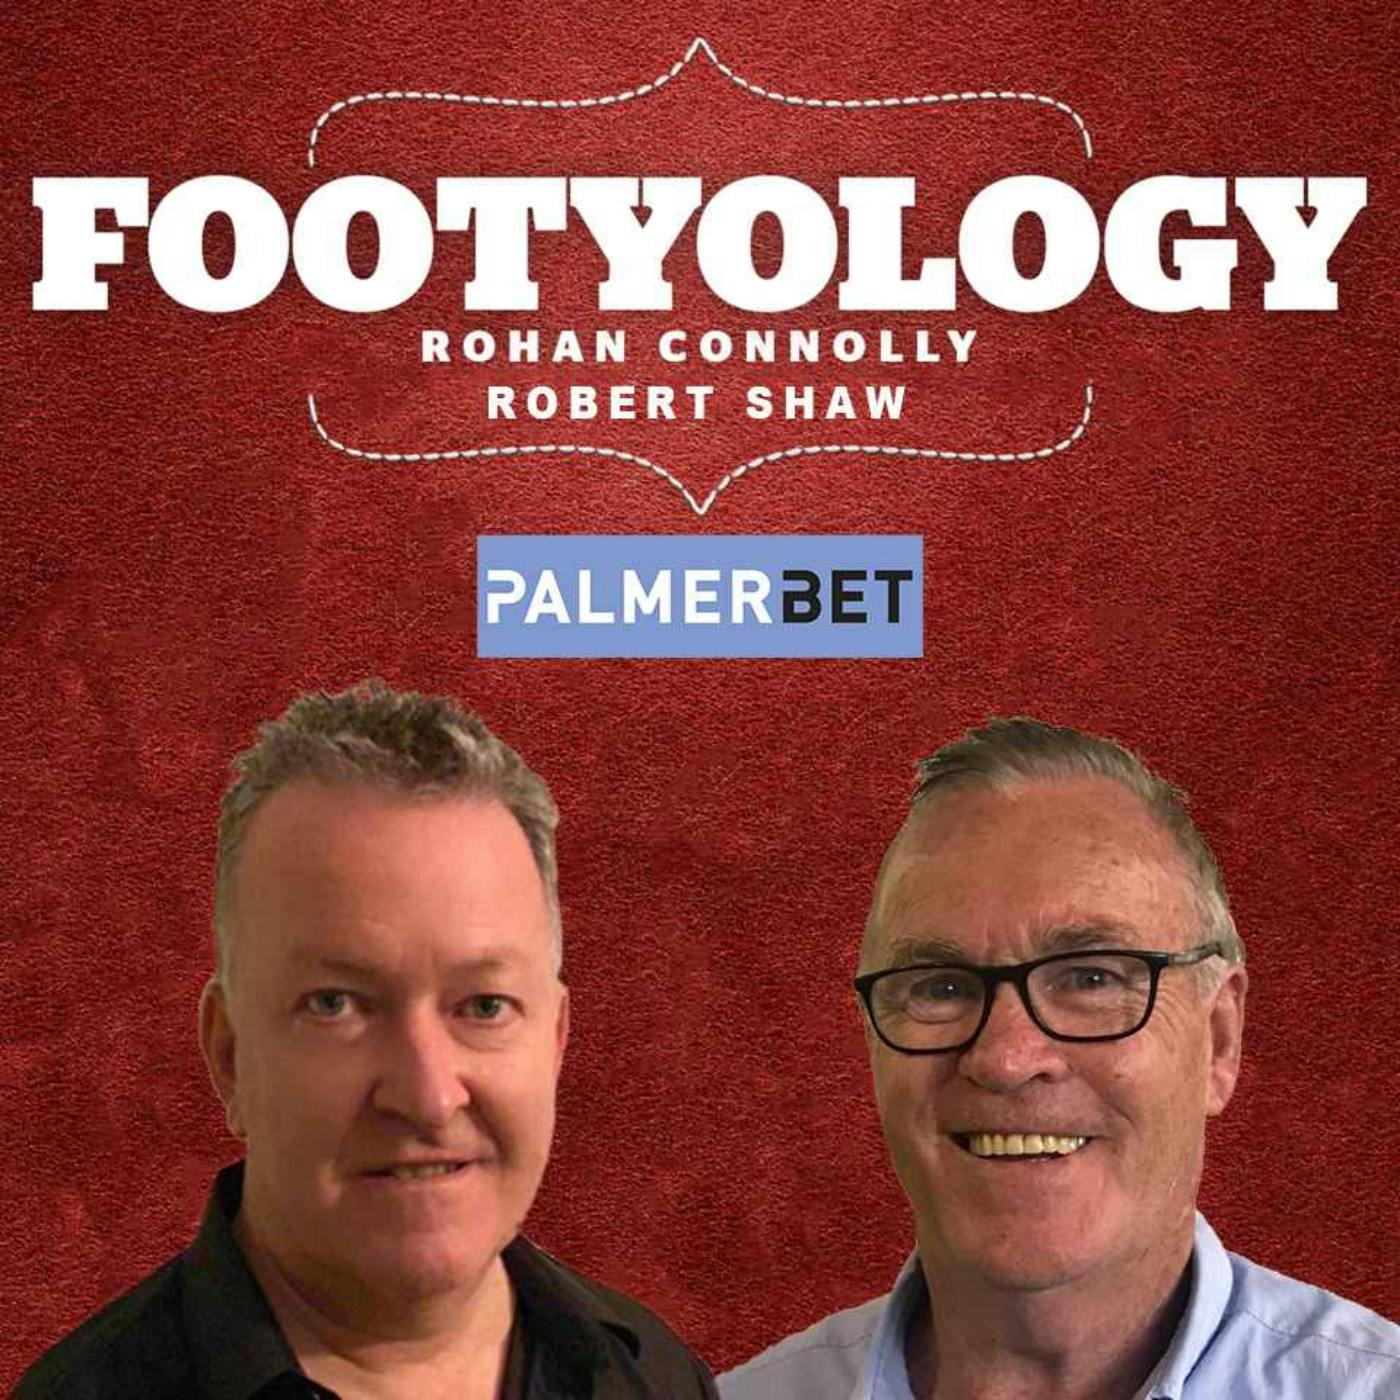 Footyology Podcast - April 27th 2022